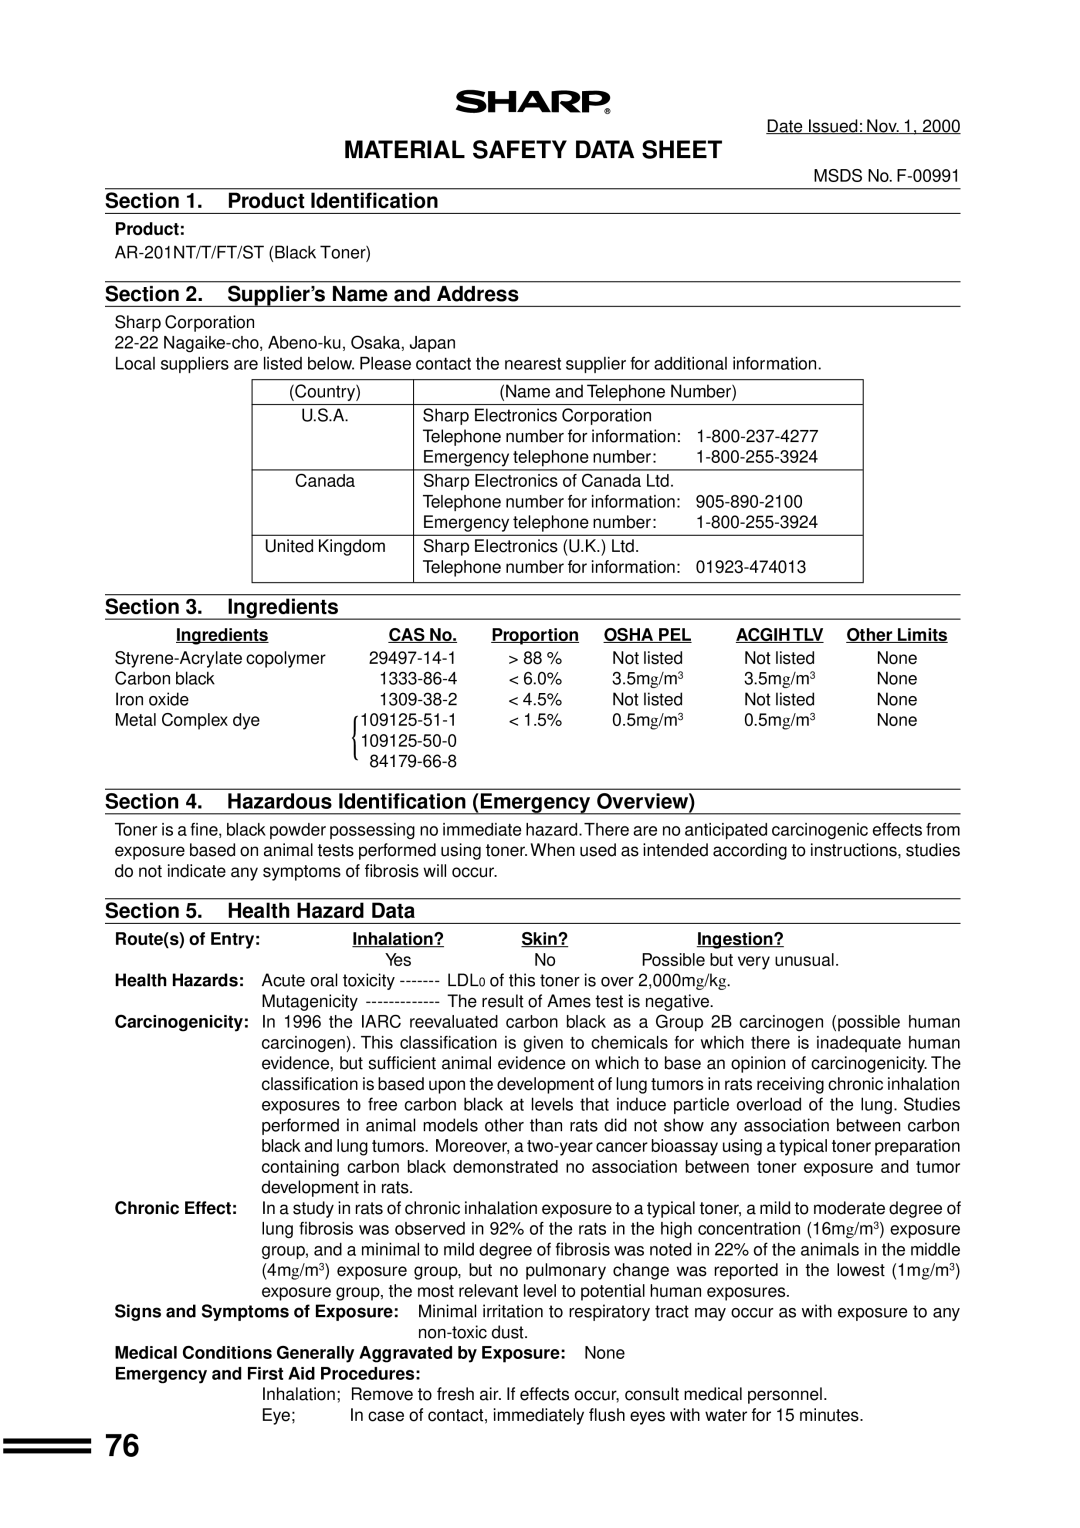 Sharp AR-207 Material Safety Data Sheet, Product Identification, Supplier’s Name and Address, Ingredients, Routes of Entry 